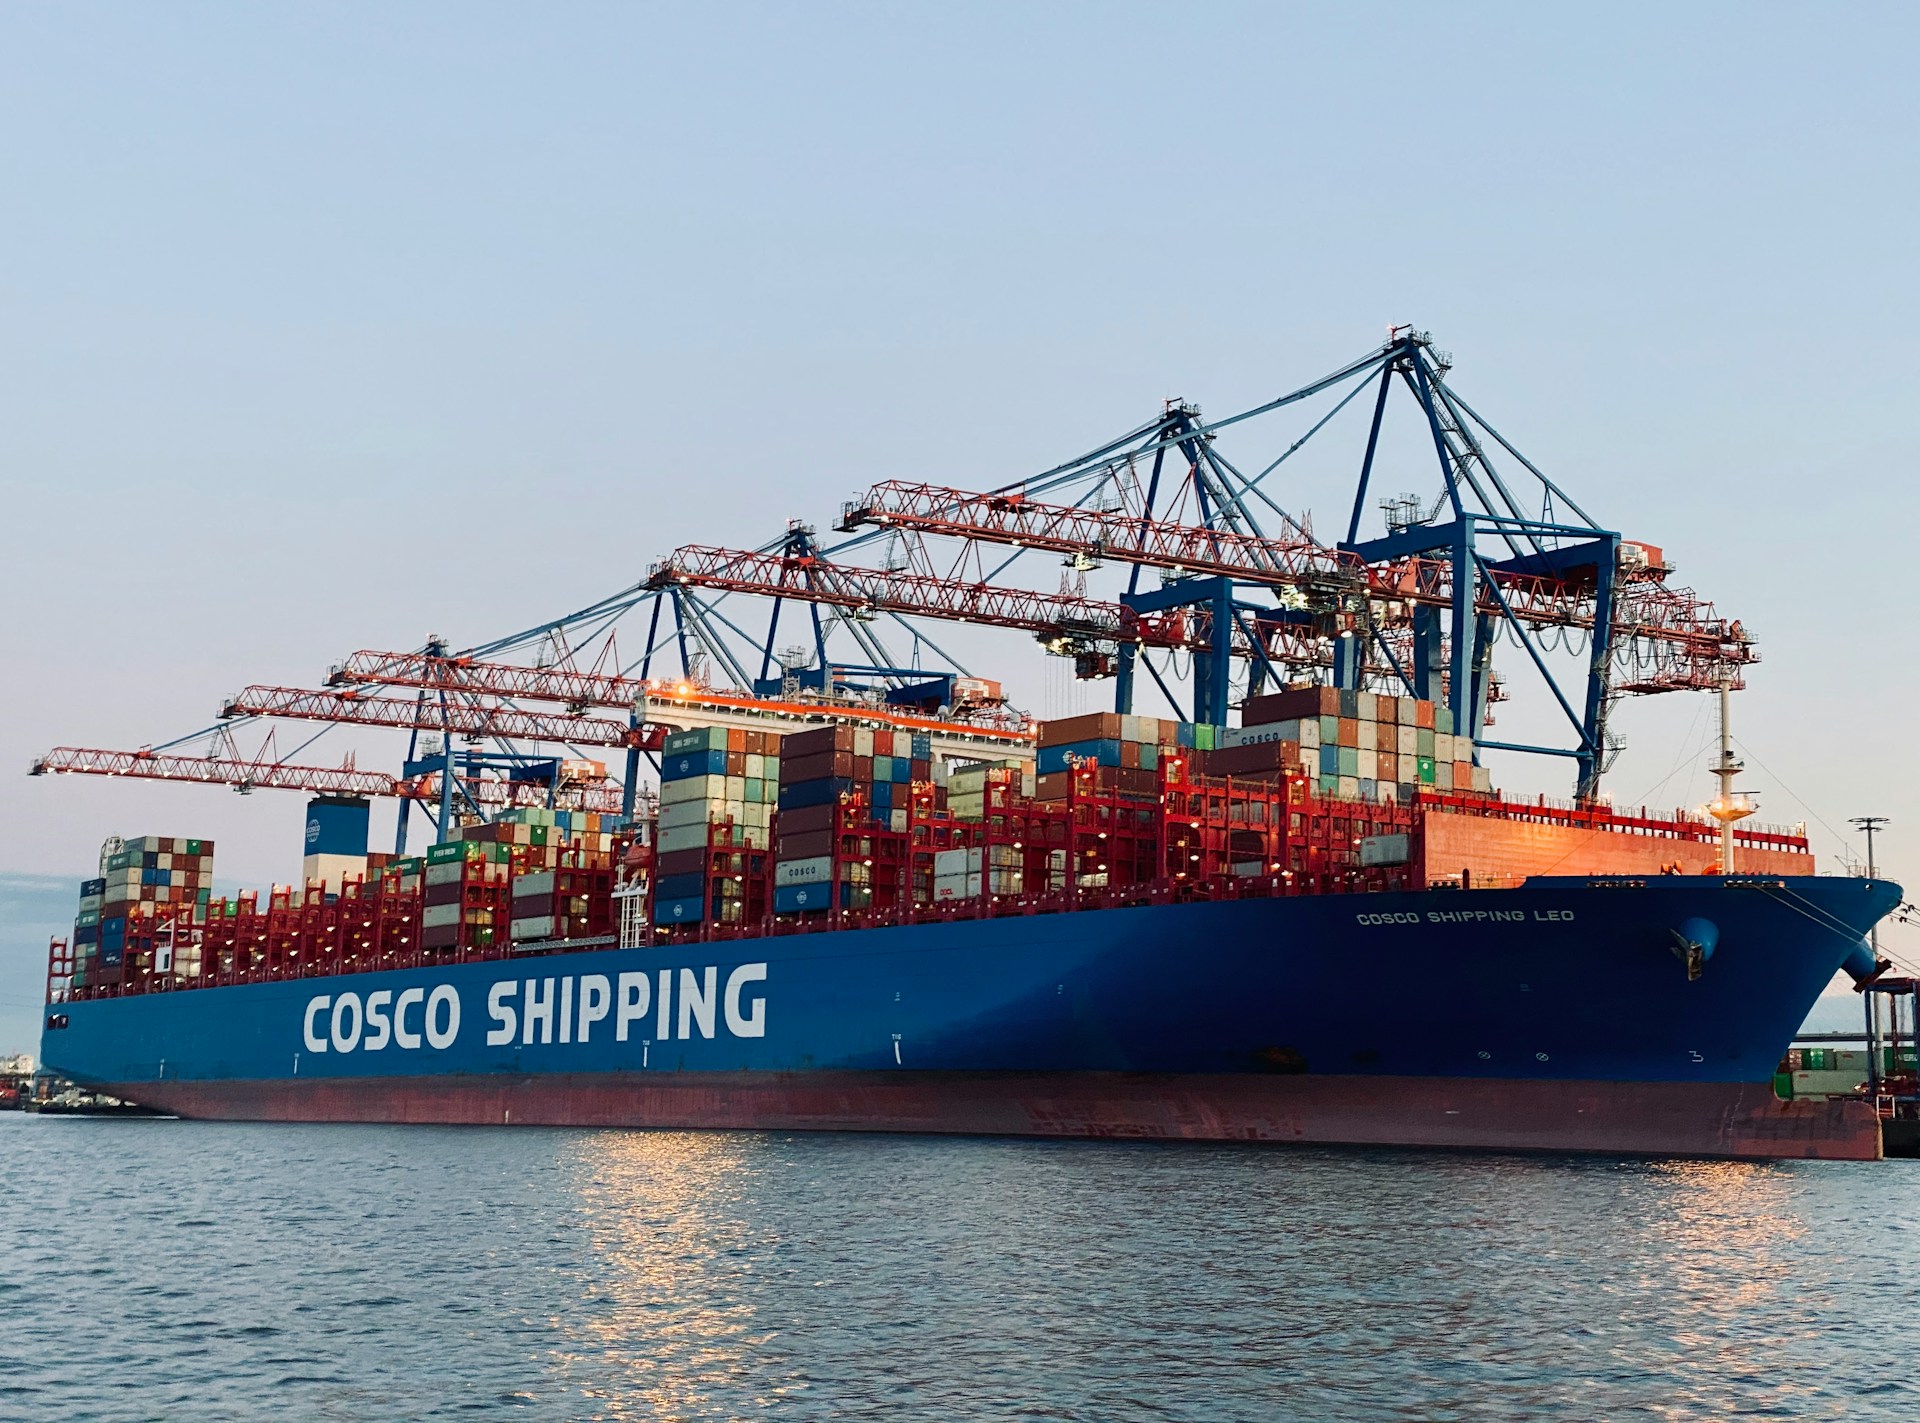 A COSCO container ship in port